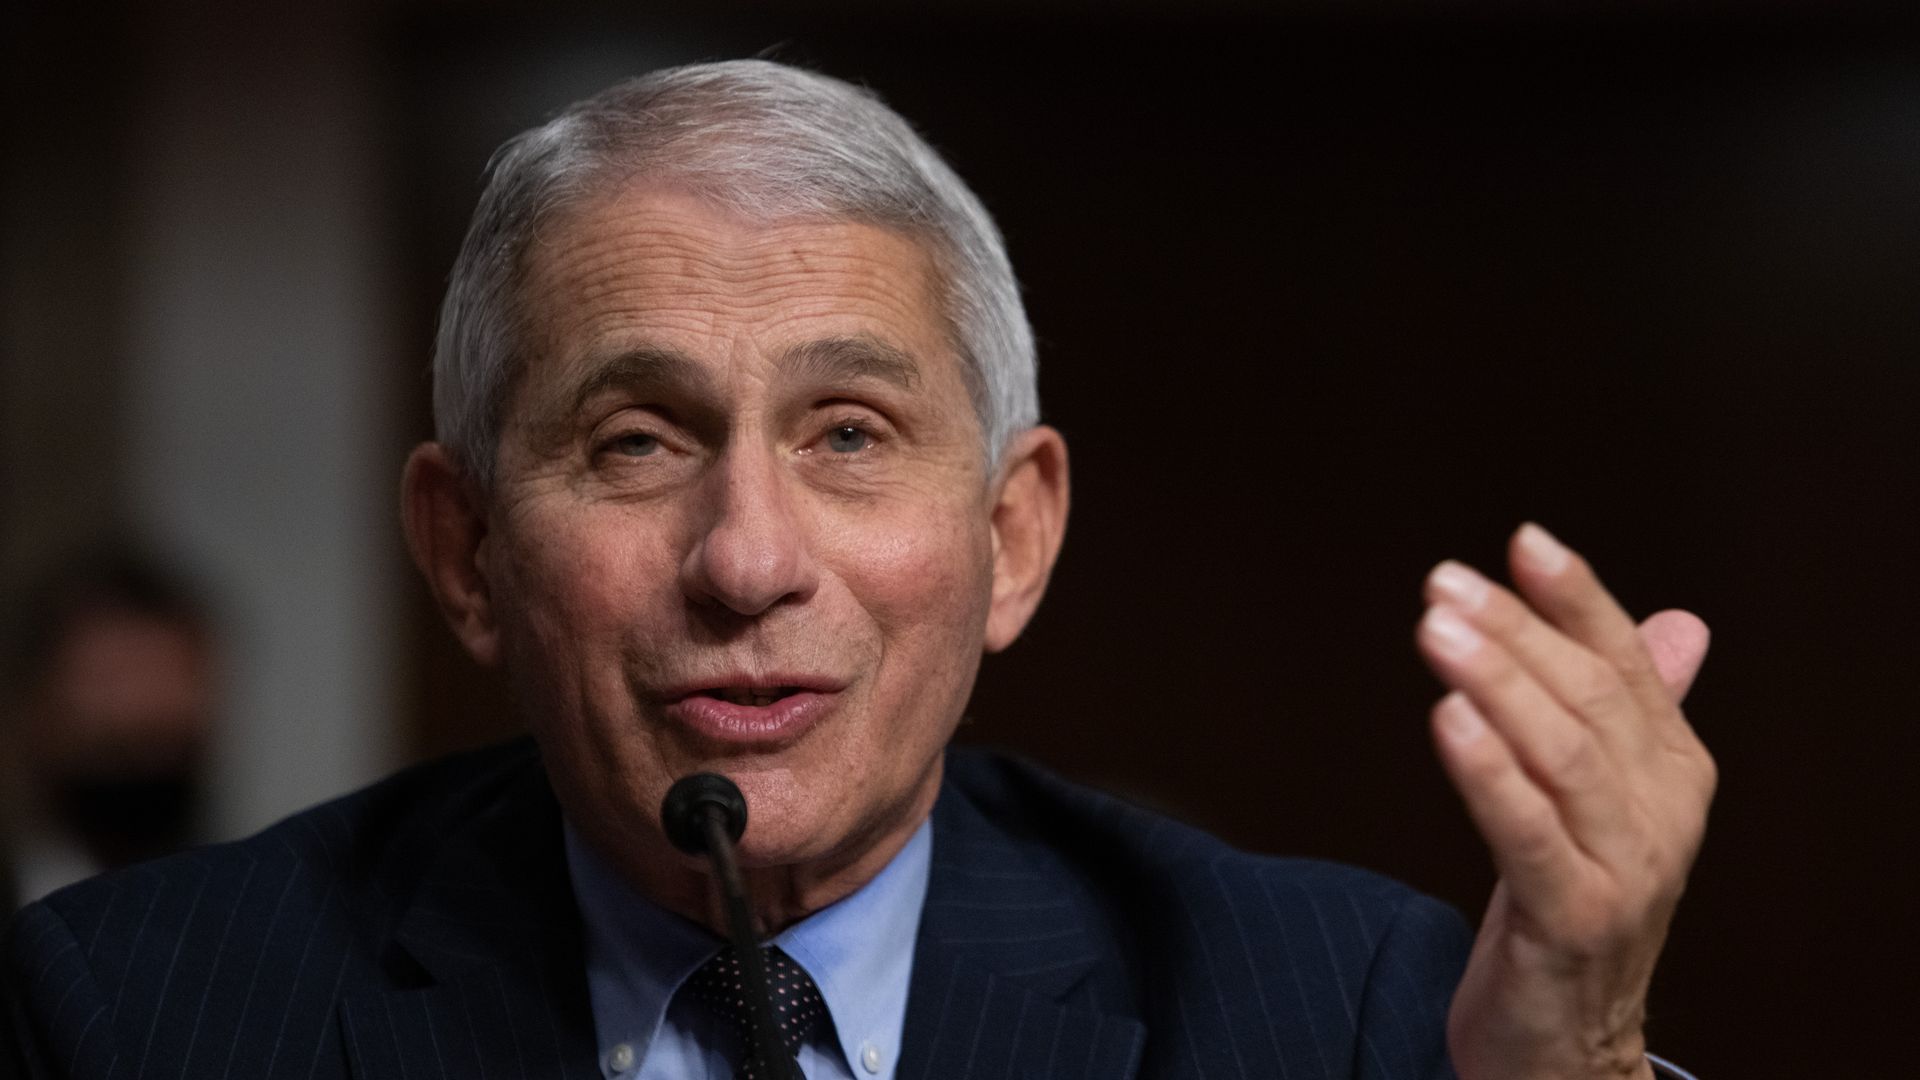 Director of the National Institute of Allergy and Infectious Diseases, Anthony Fauci, testifies during a Senate hearing on COVID-19